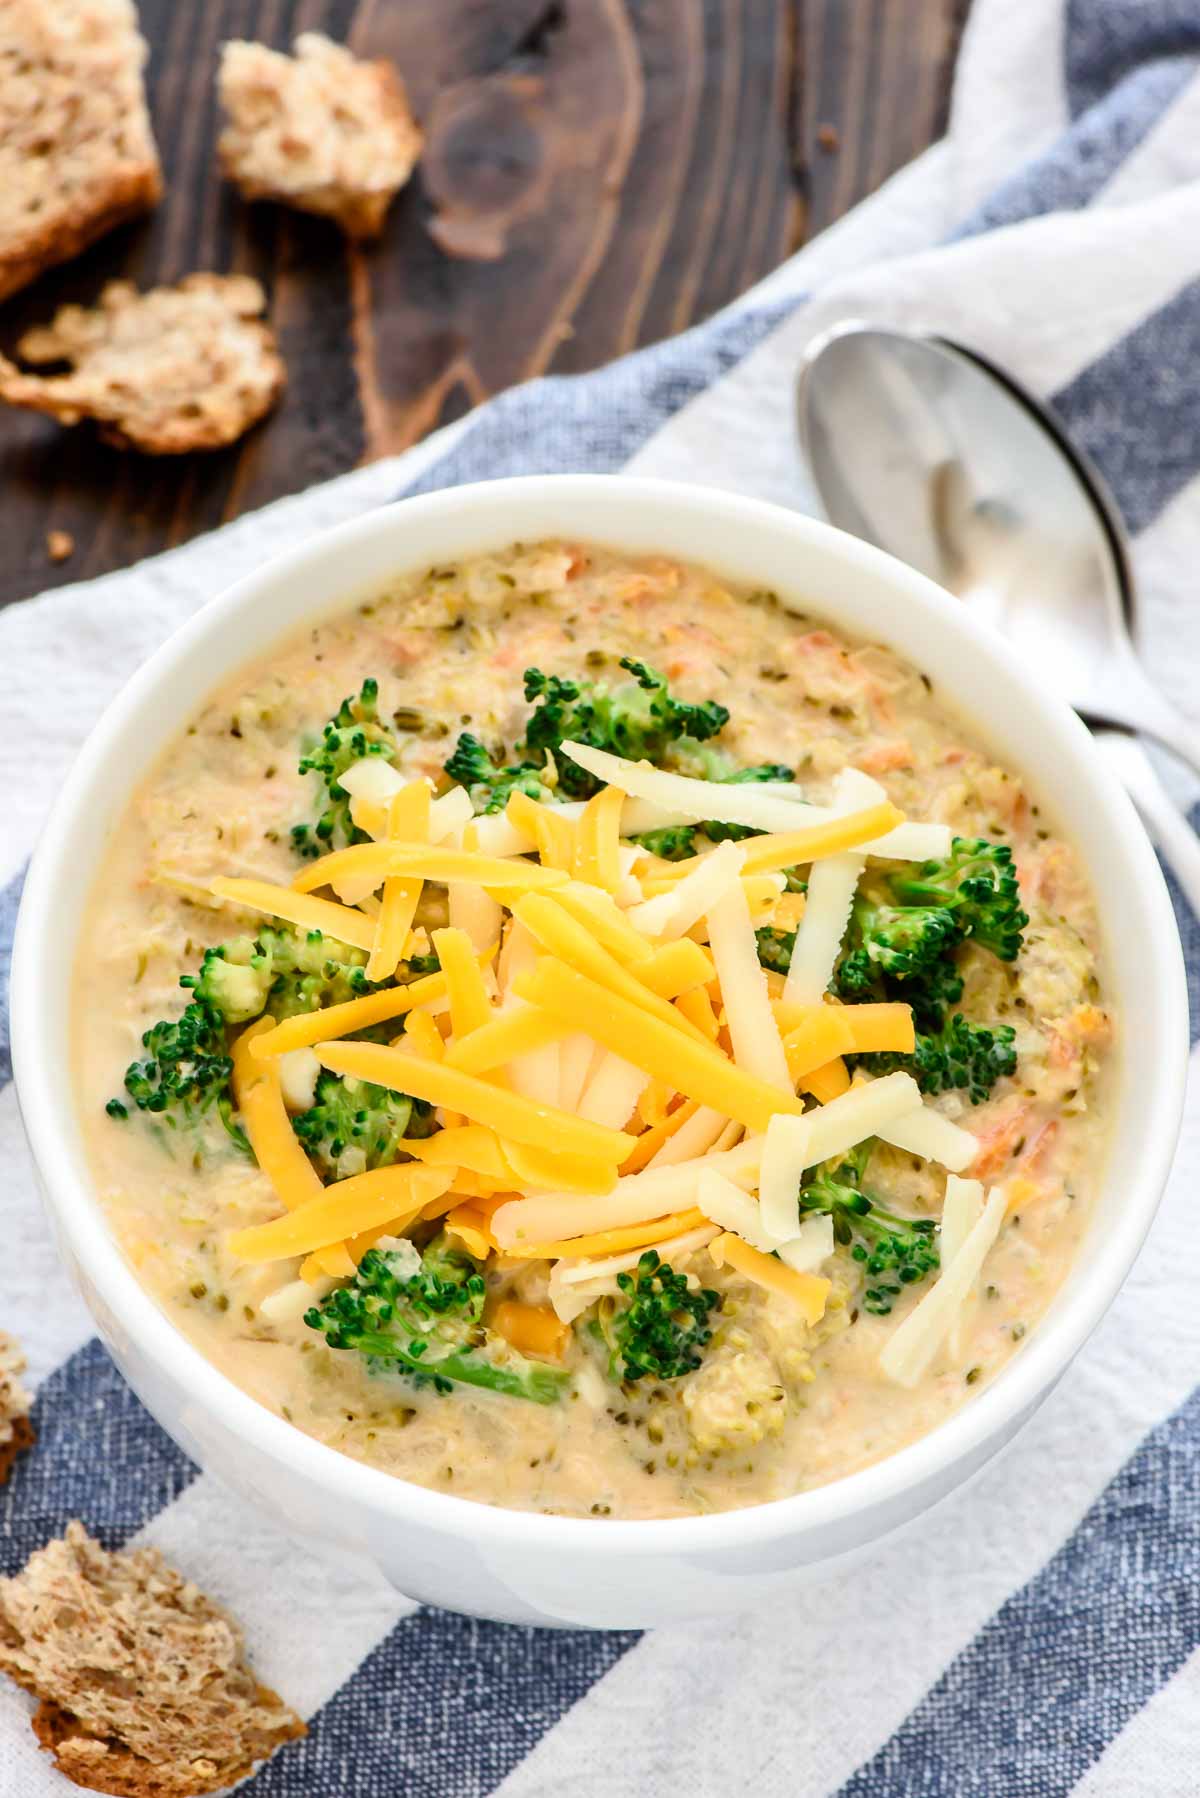 http://www.wellplated.com/slow-cooker-broccoli-and-cheese-soup/